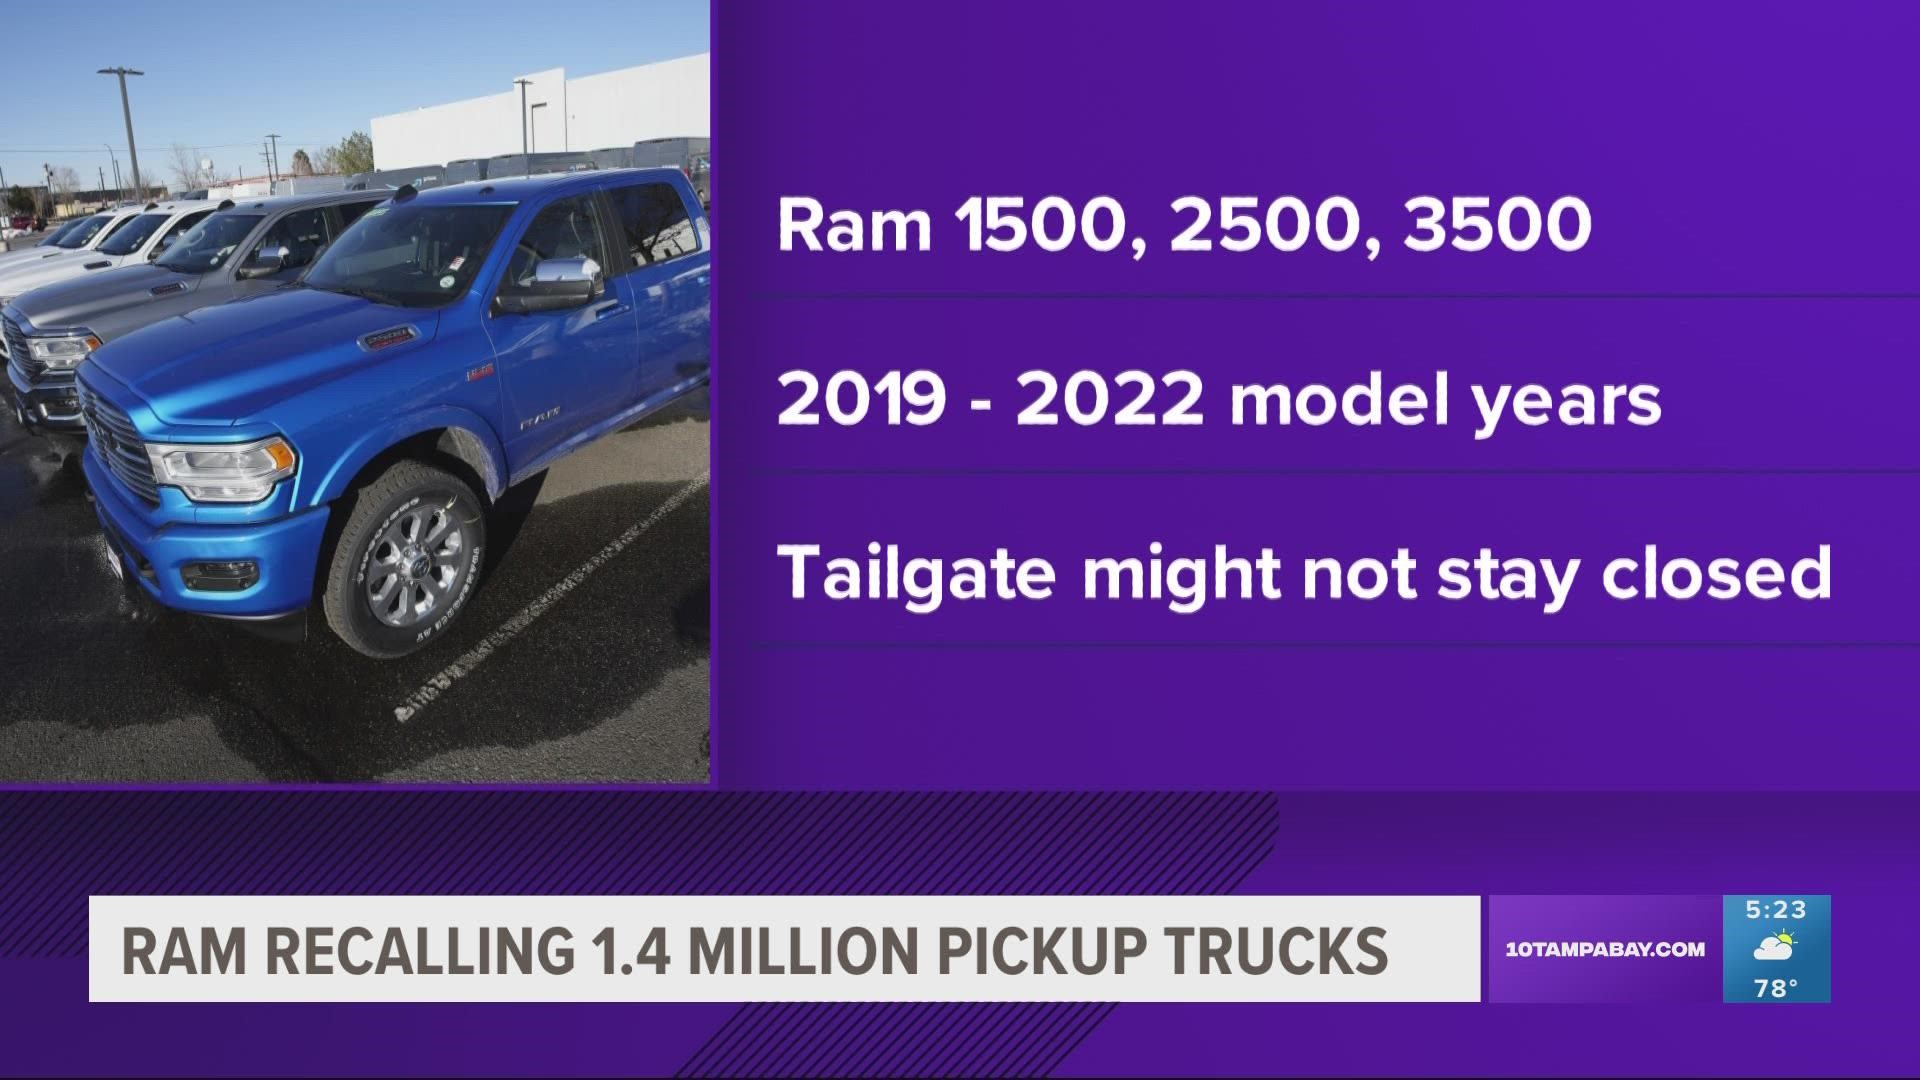 The recall covers Ram 1500, 2500 and 3500 pickups from the 2019 to 2022 model years.